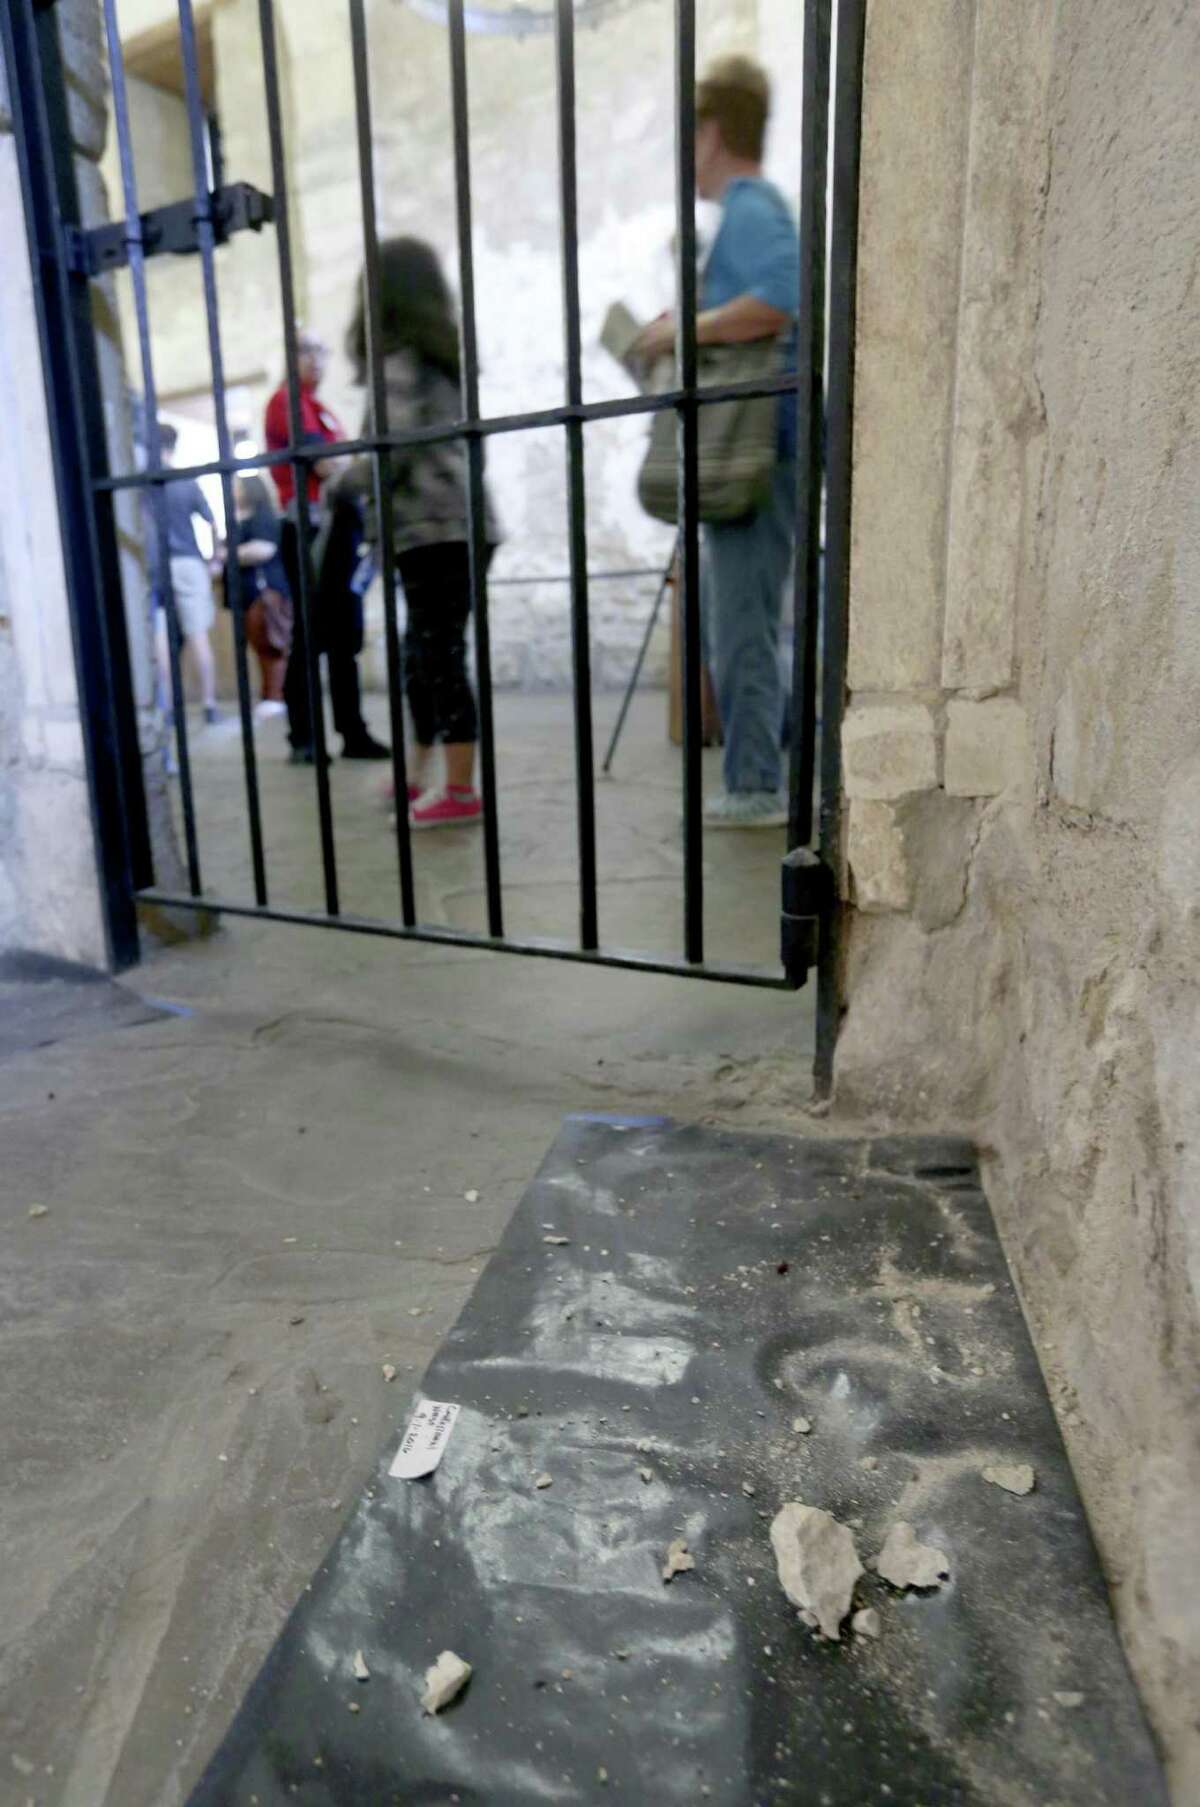 Black butcher paper lies at the base of confessional room walls Tuesday, Nov. 22, 2016, inside the Alamo church as part of a study of the deterioration the shrine's inside walls.